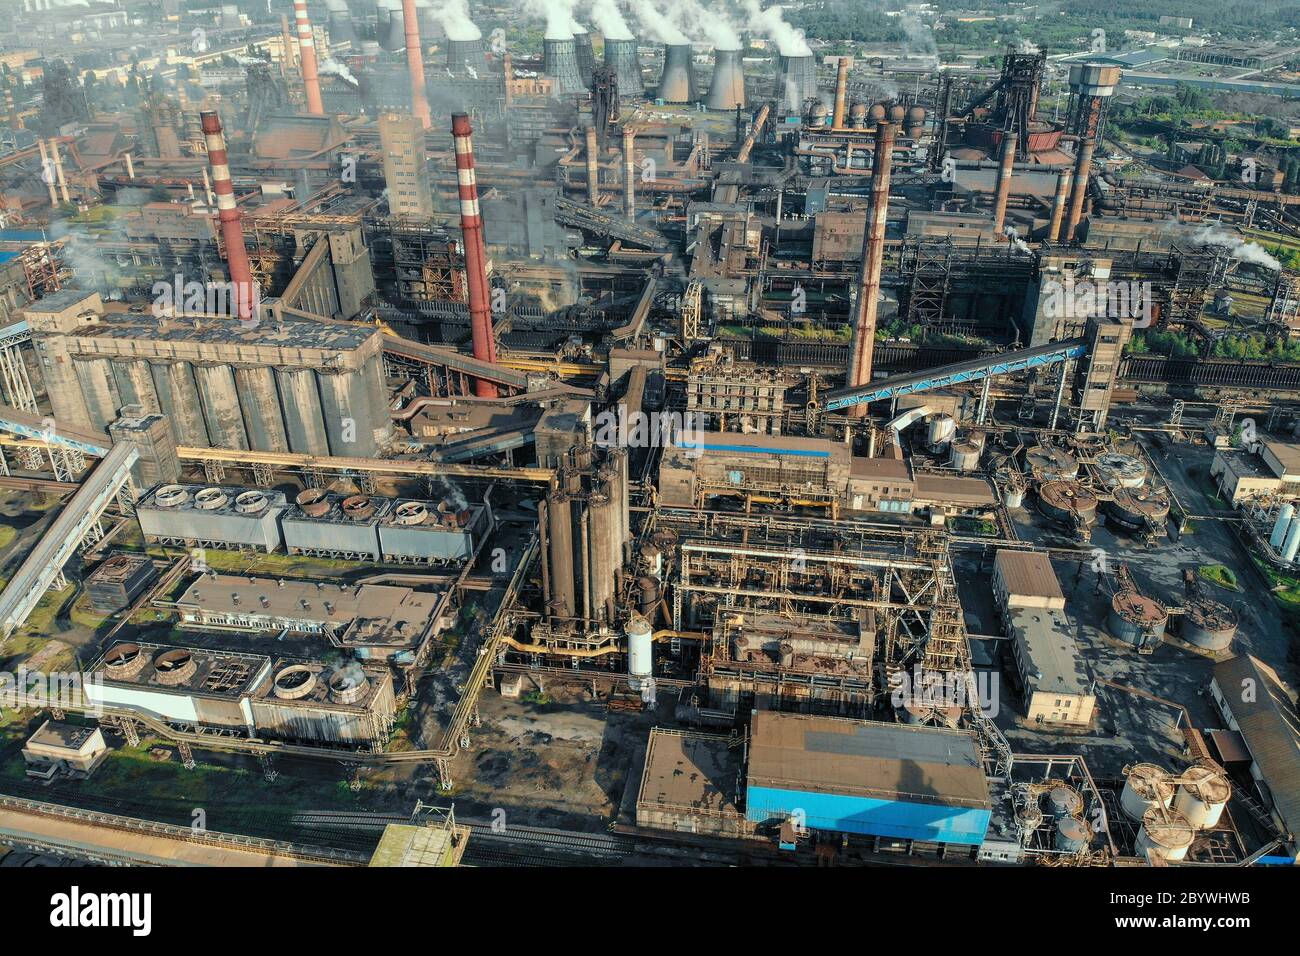 Aerial view of huge Metallurgical Plant, smokestacks and chimneys with smoke. Environmental pollution from petrochemical production industrial factory. Stock Photo